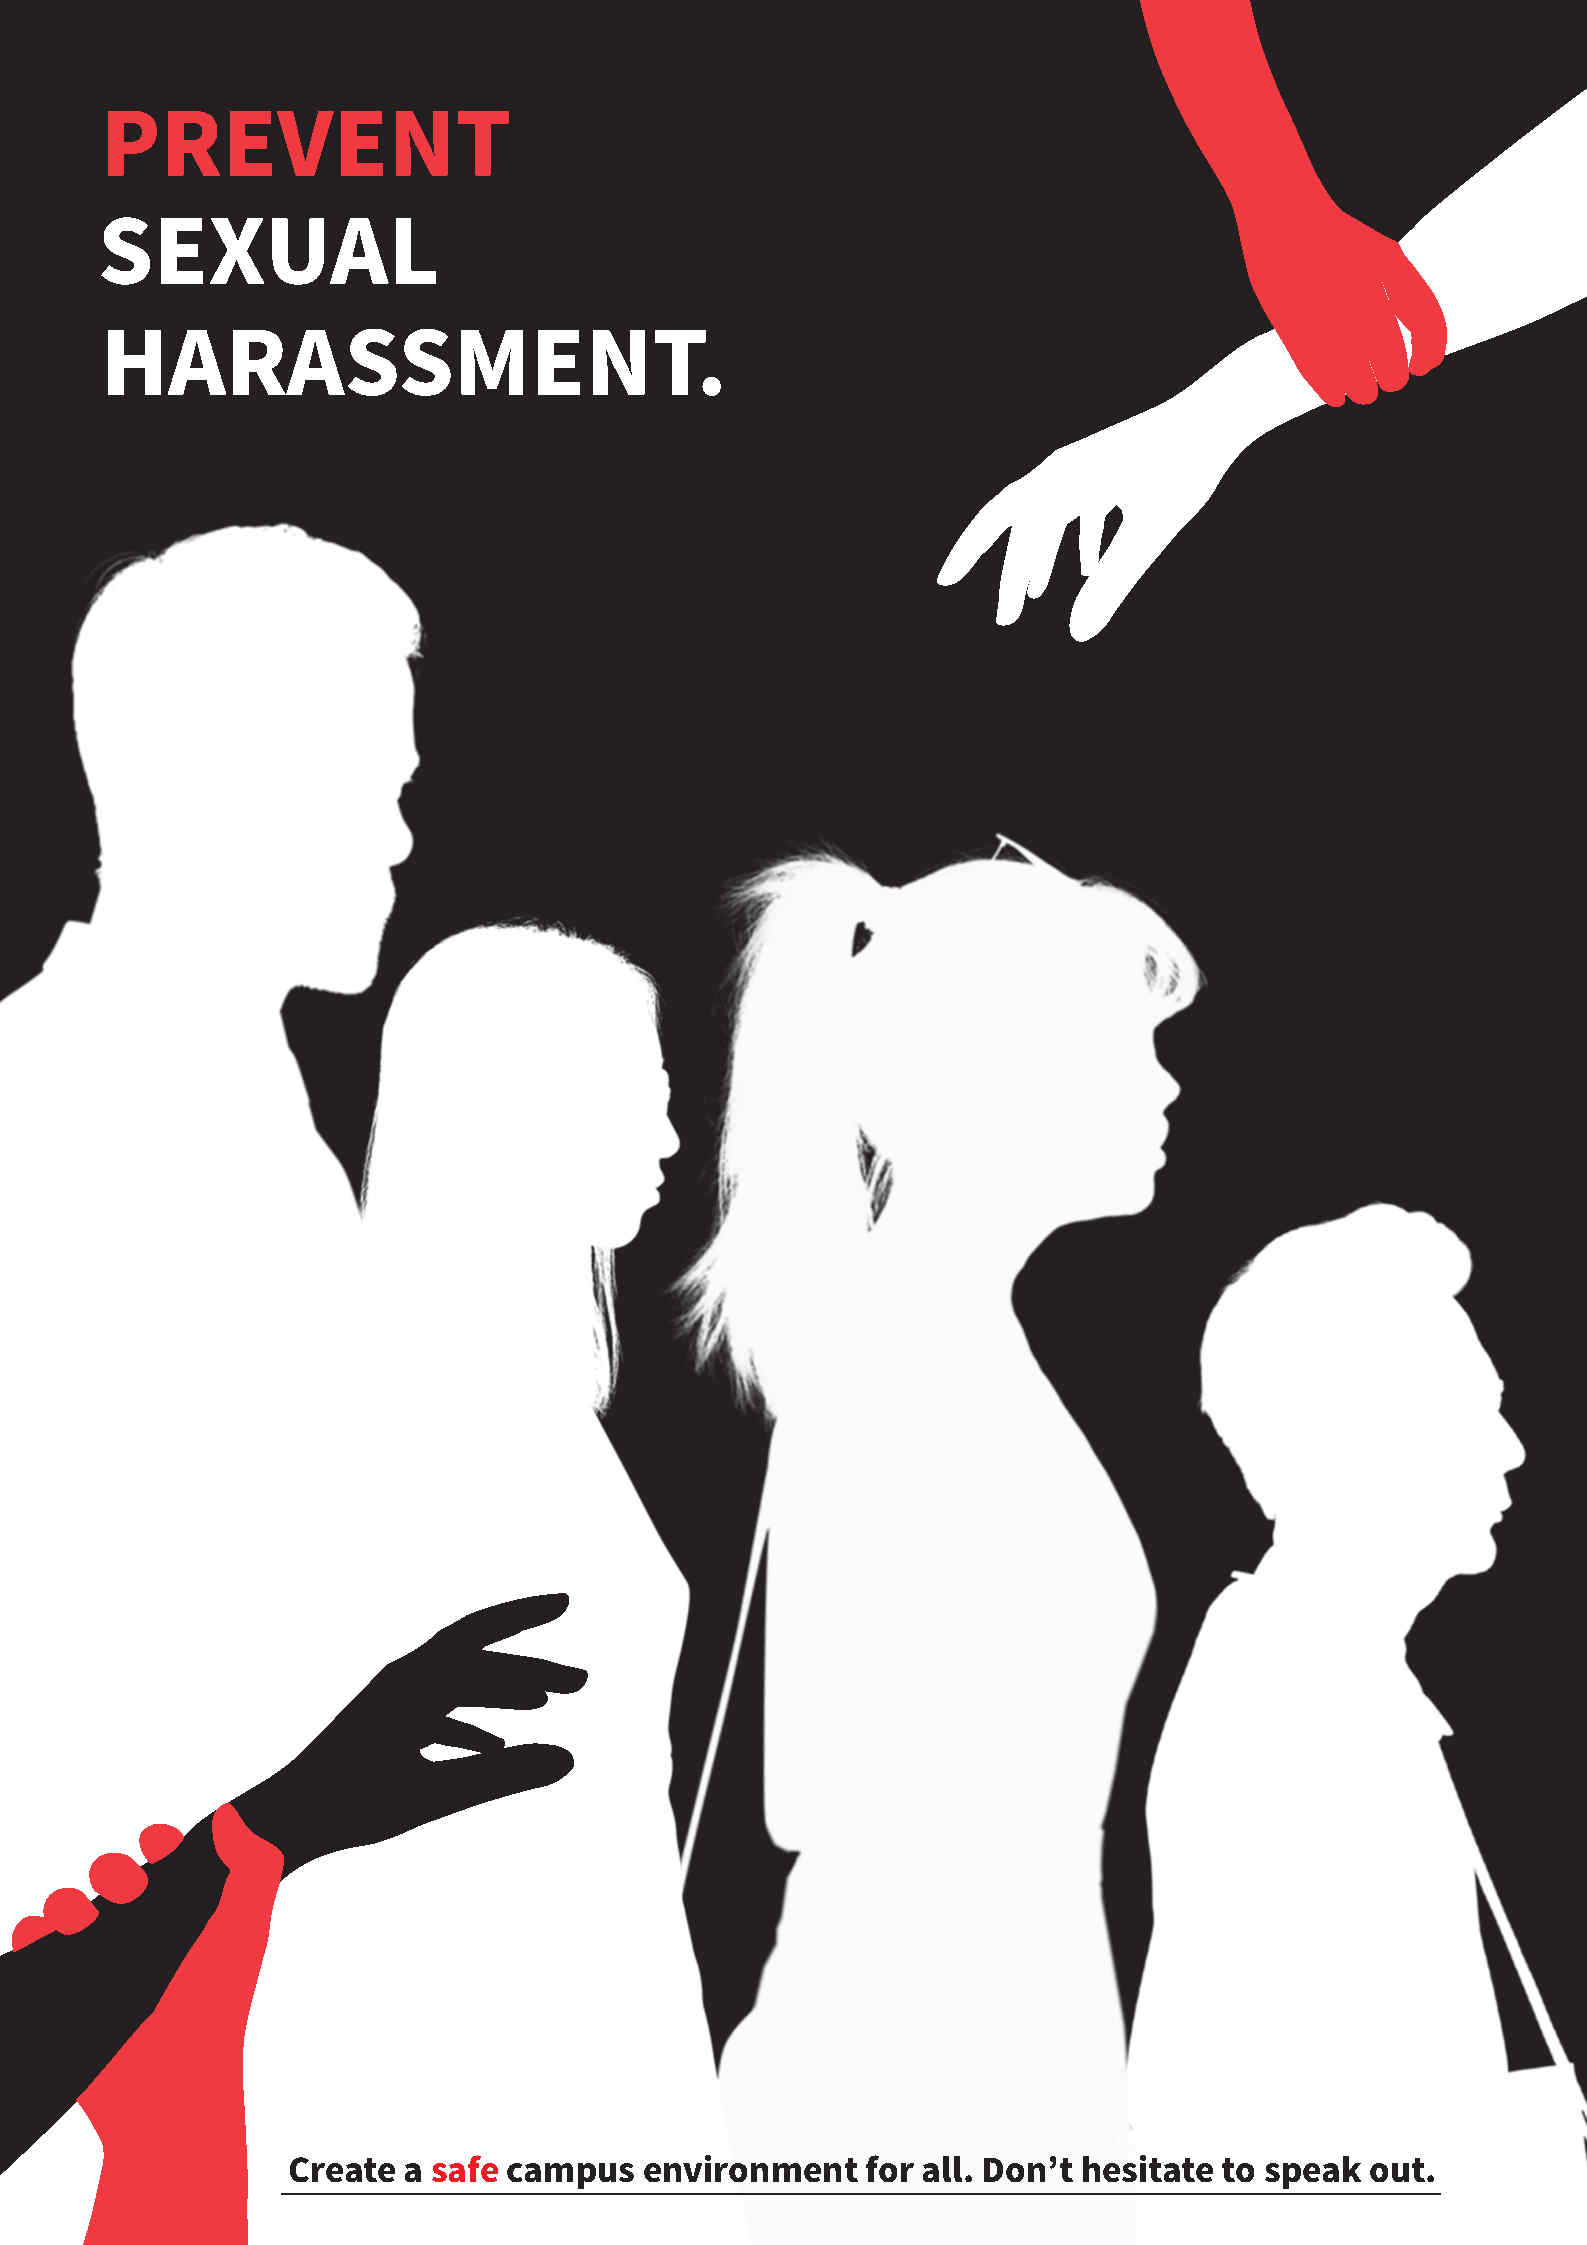 Merit: Tsui Tsz Shan (Preventing Sexual Harassment) The poster aims to raise awareness of sexual harassment and how it can happen to anyone, anytime regardless of gender. We should strive to create a safe campus environment for all where people can be comfortable in their own skin. Don’t be a bystander, speak out.